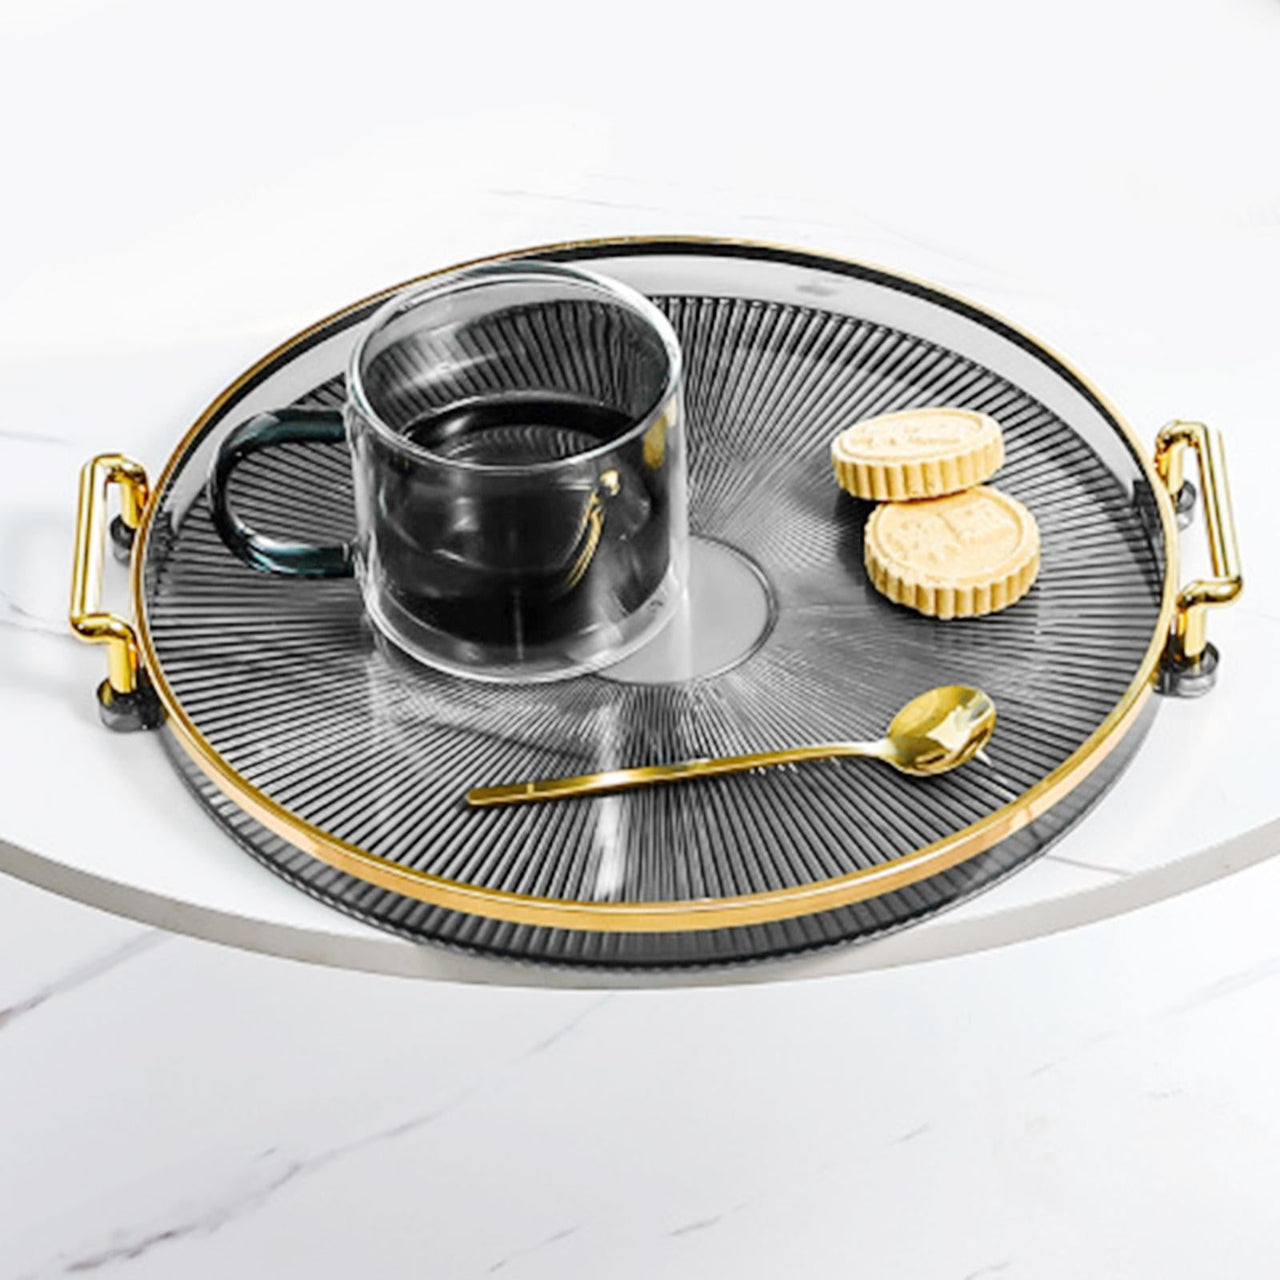 Nordic Style Round Serving Tray with Handles - Casatrail.com